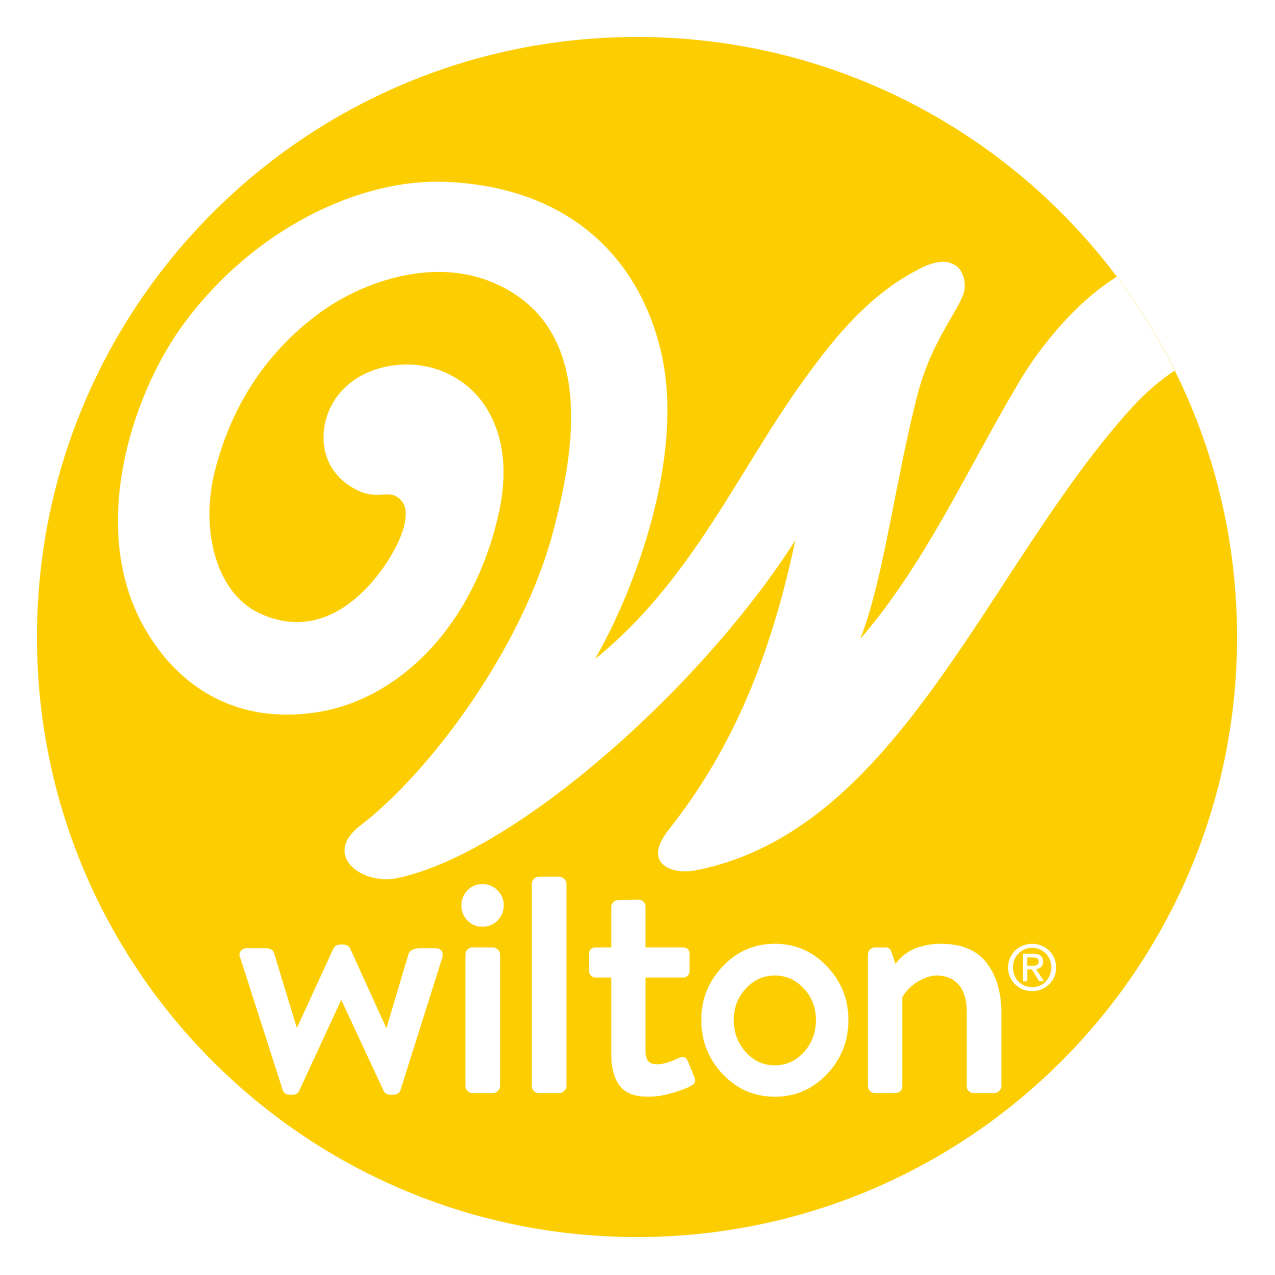 Wilton Introduces New Dessert Drizzles and New Flavors of Decorating Icing Pouches to Make Baking Easy and Delicious this Summer